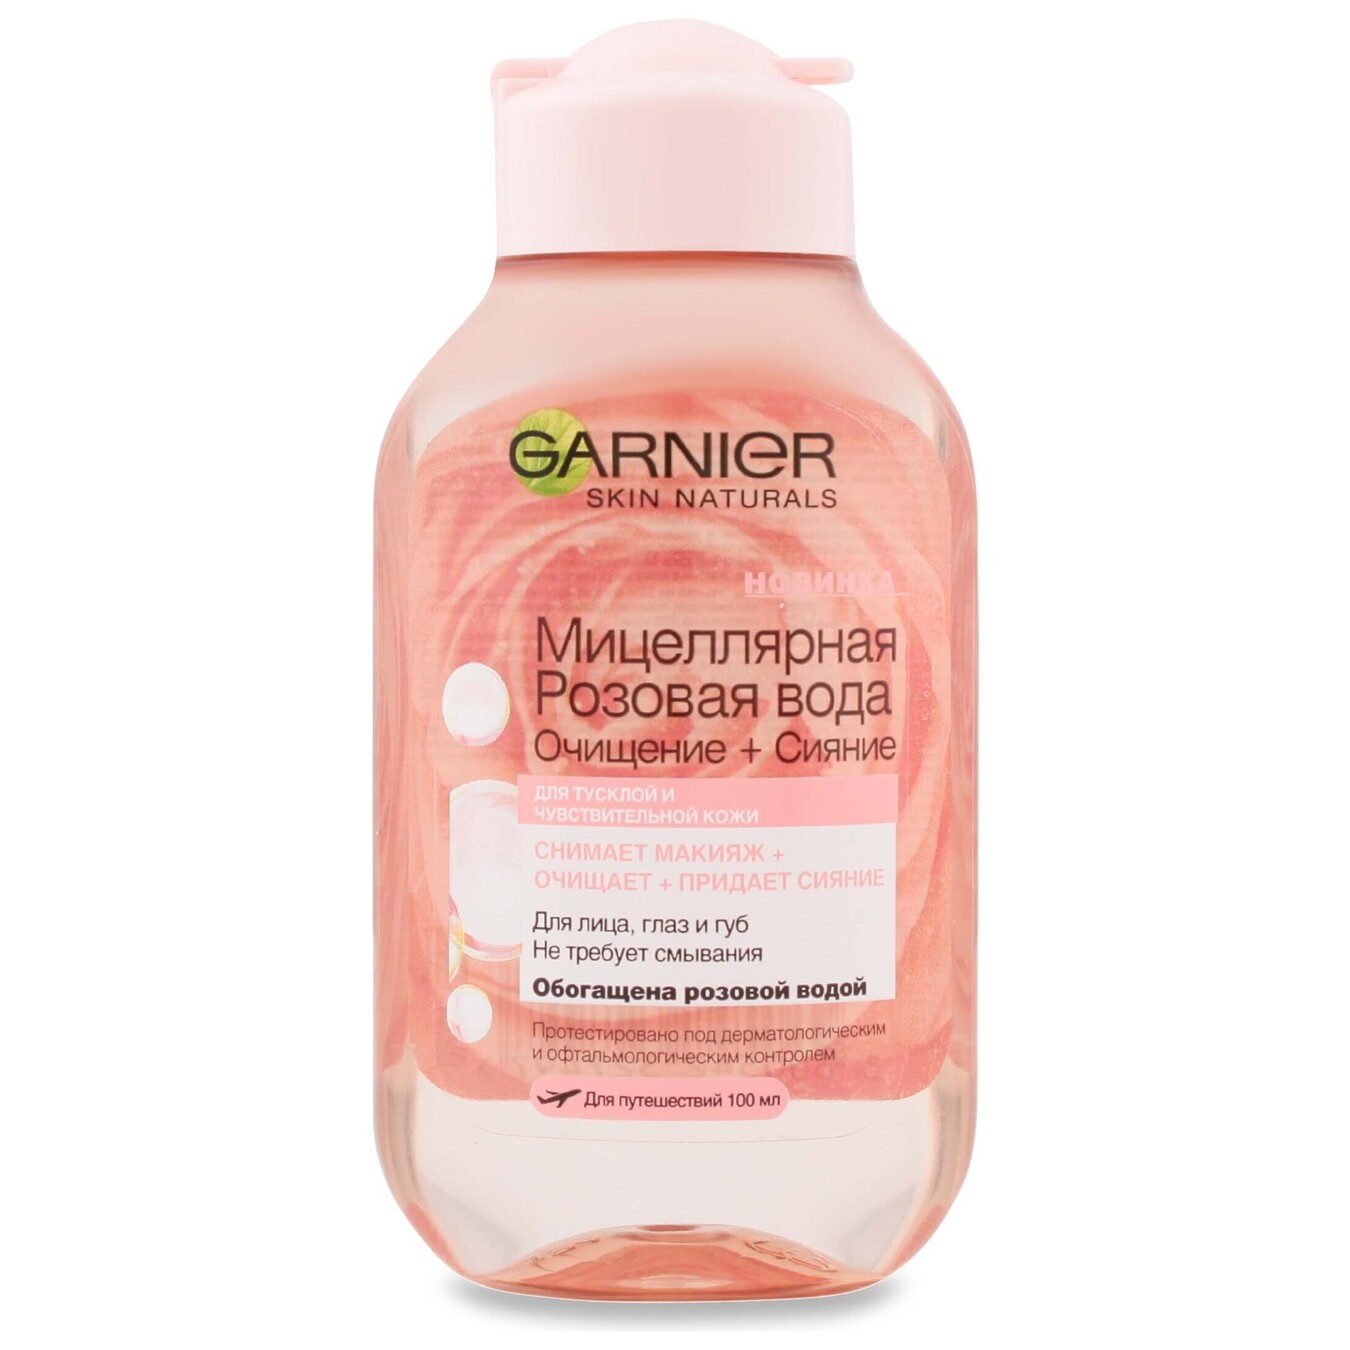 Micellar water Garnier Skin Naturals with rose water for cleansing the skin of the face 100 ml